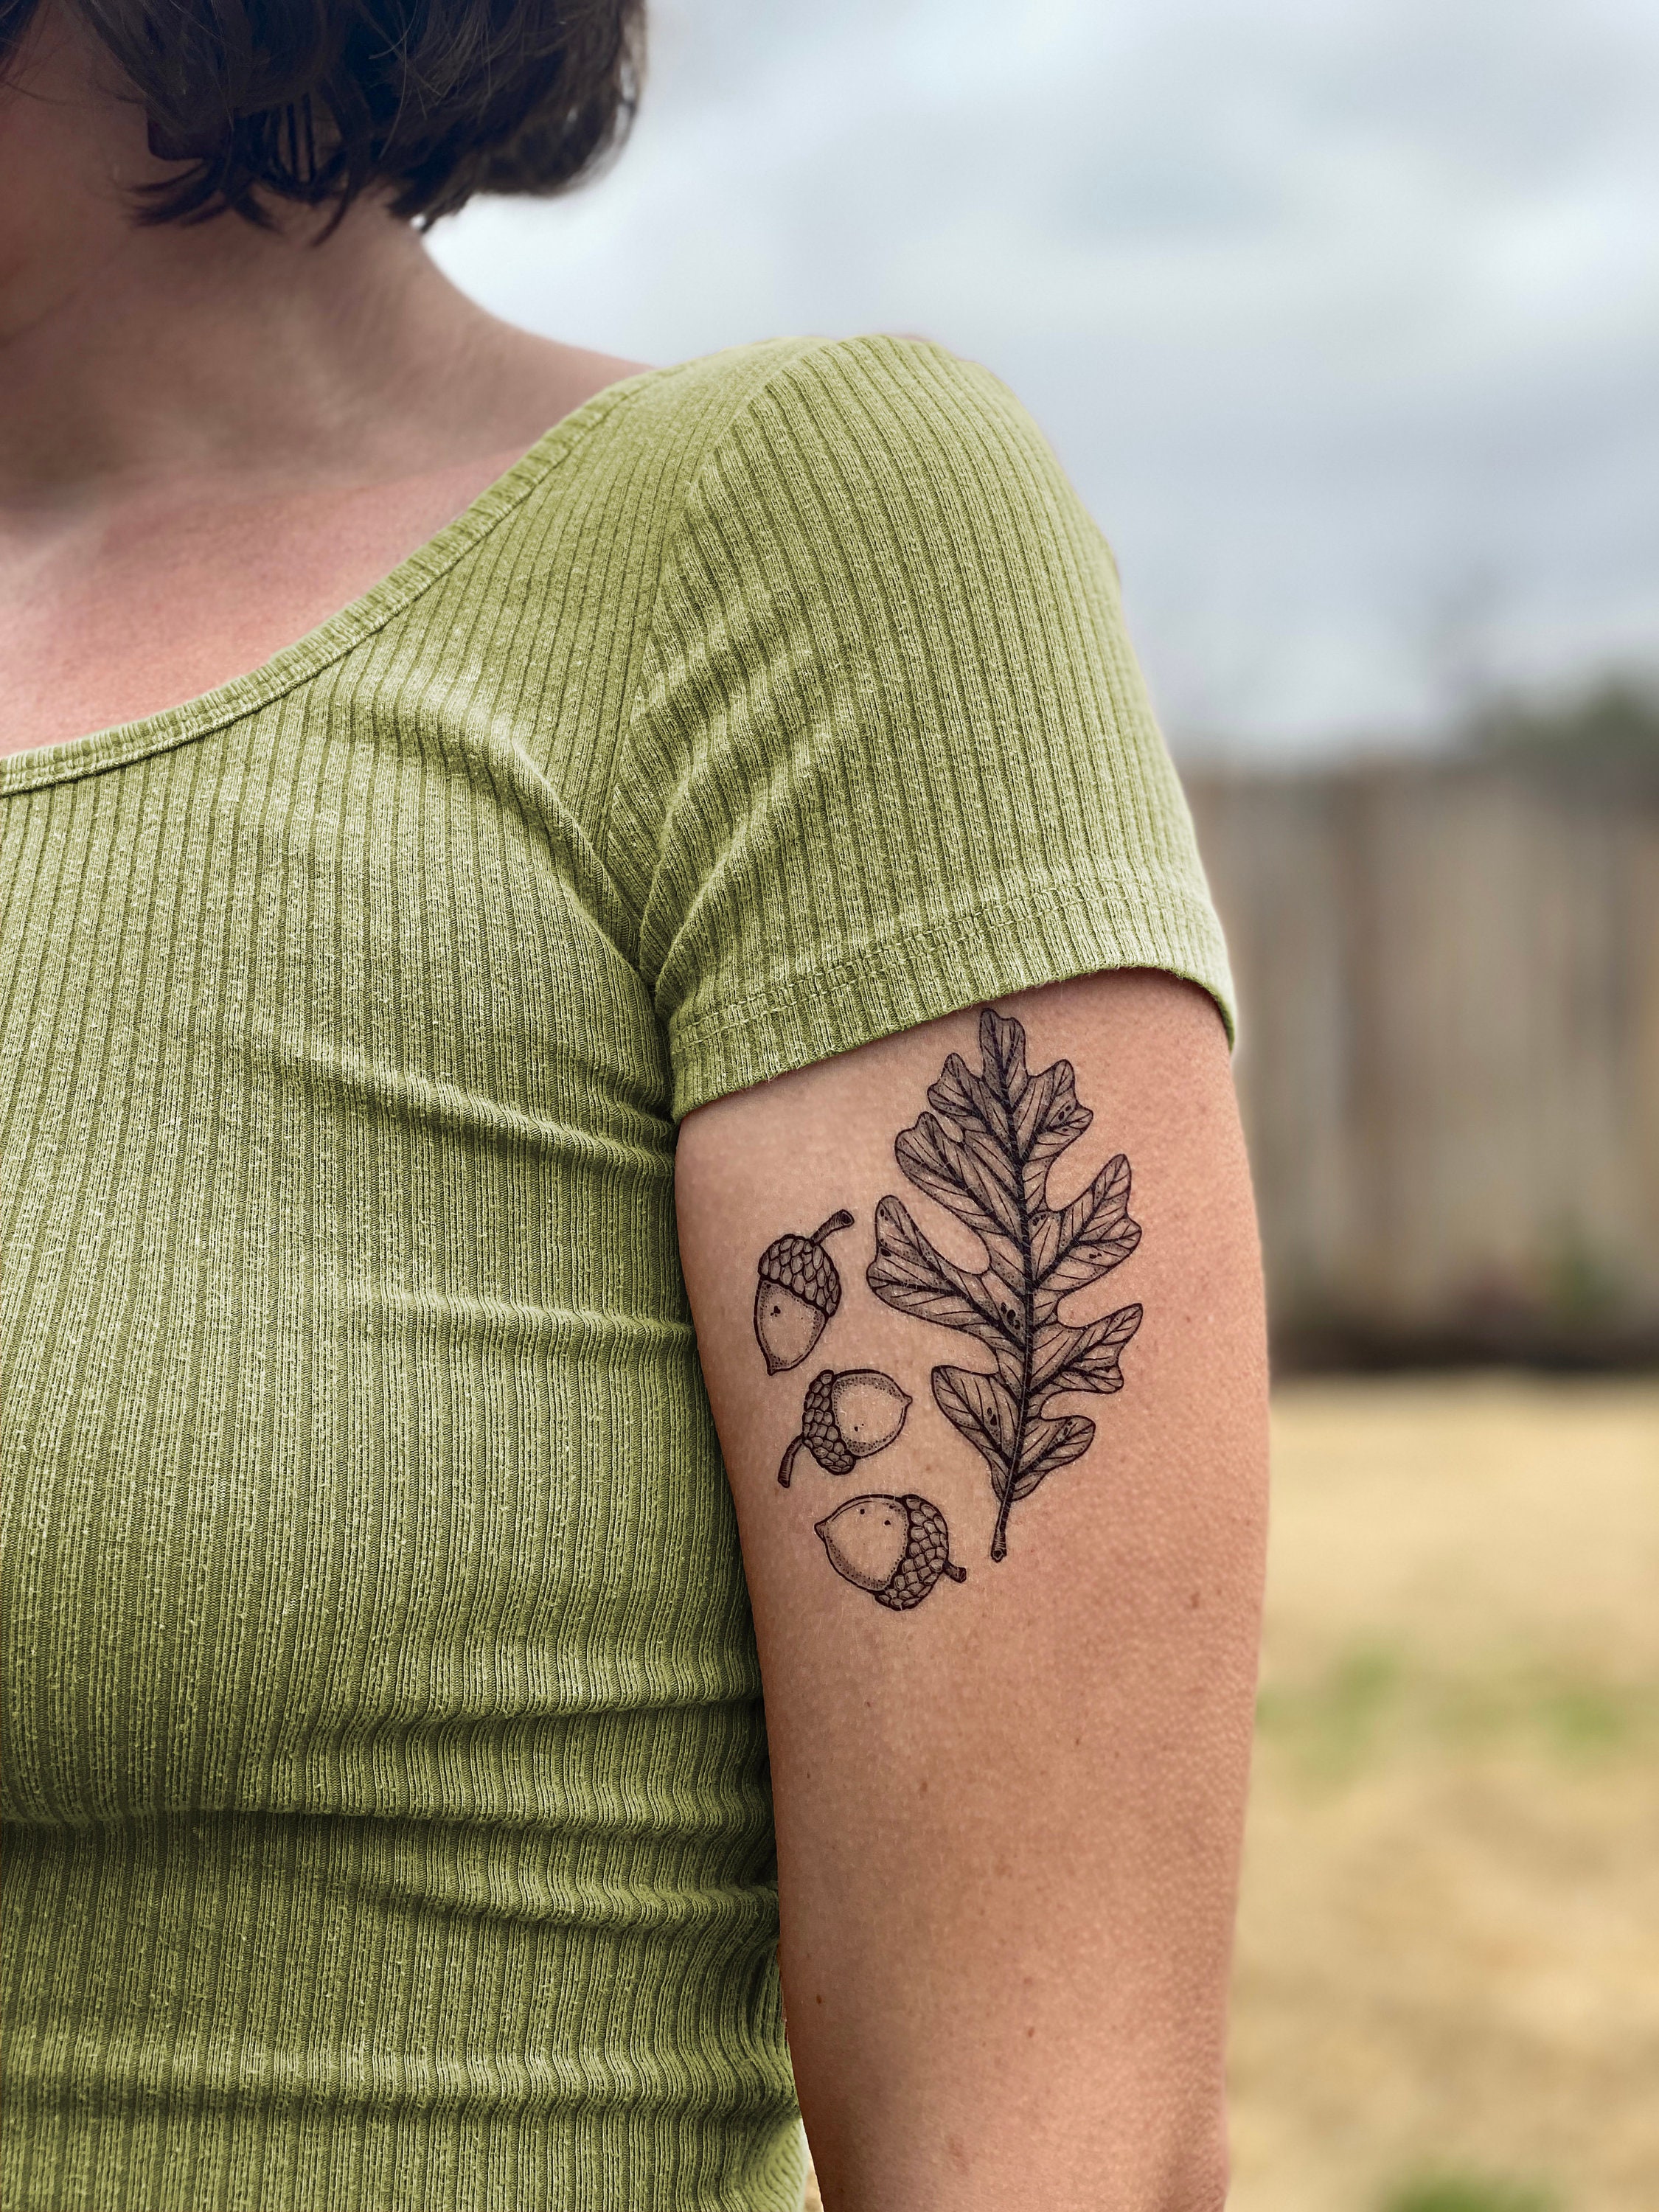 Done by Holly at Drawing Board Tattoo in Asheville, NC : r/tattoos